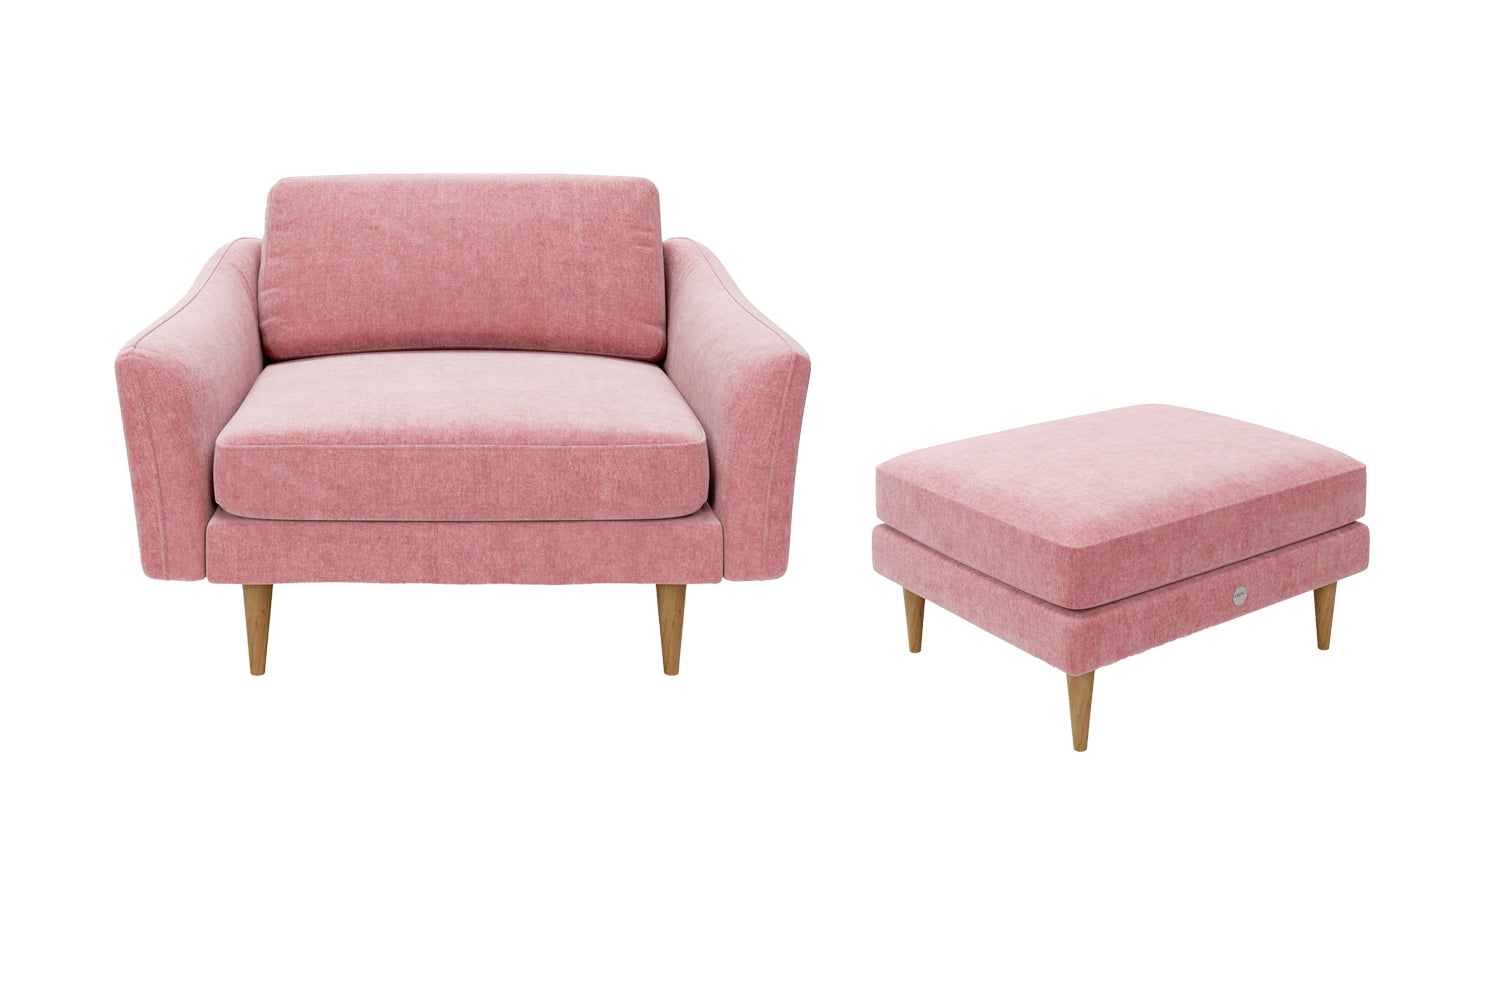 The Rebel - 1.5 Seater Snuggler and Footstool Set - Blush Coral